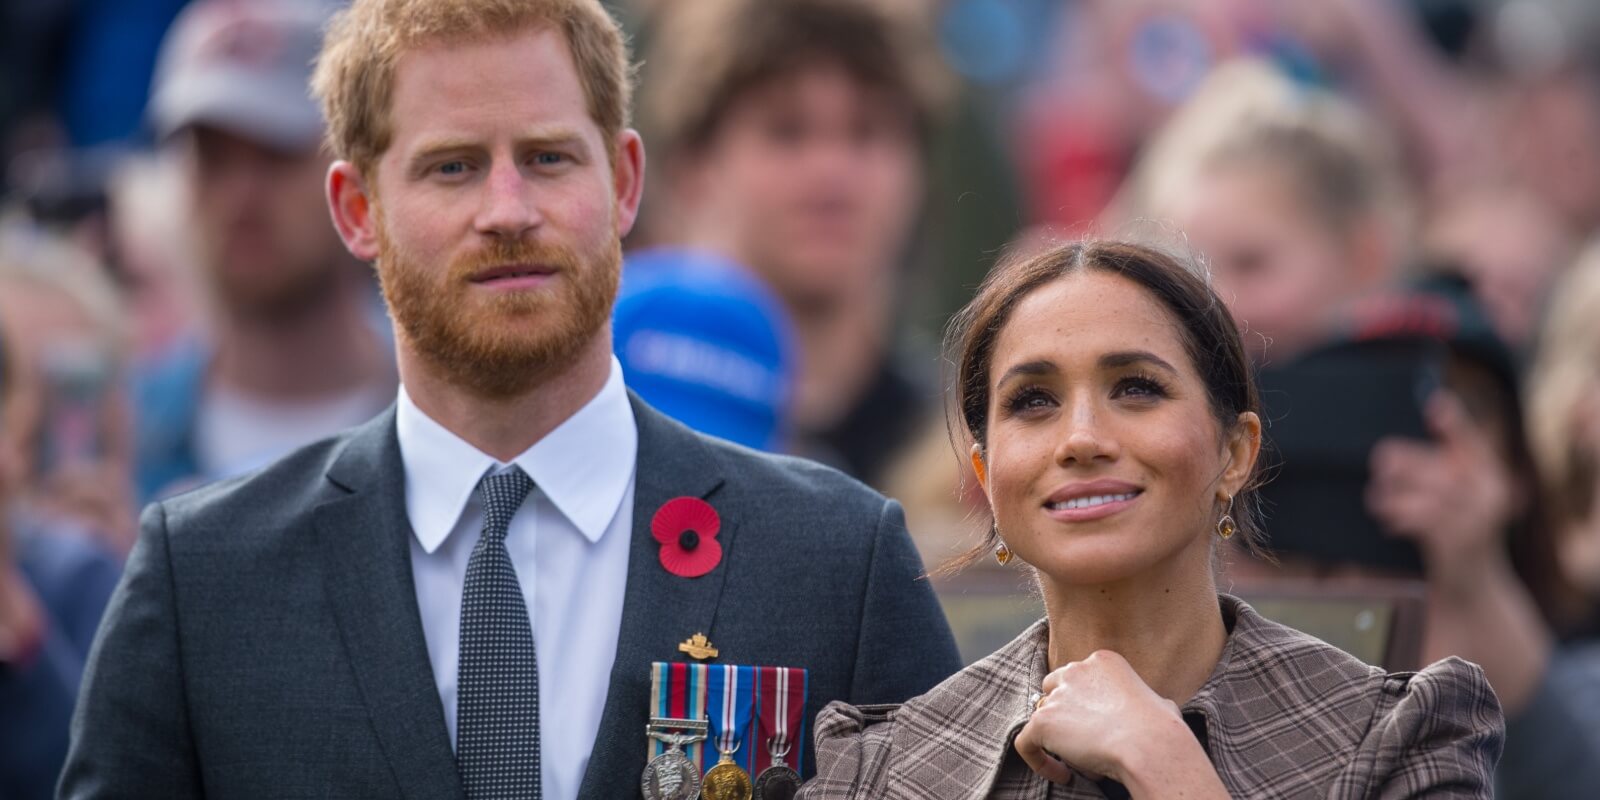 Prince Harry and Meghan Markle visit the newly unveiled UK war memorial and Pukeahu National War Memorial Park on October 28, 2018 in Wellington, New Zealand.